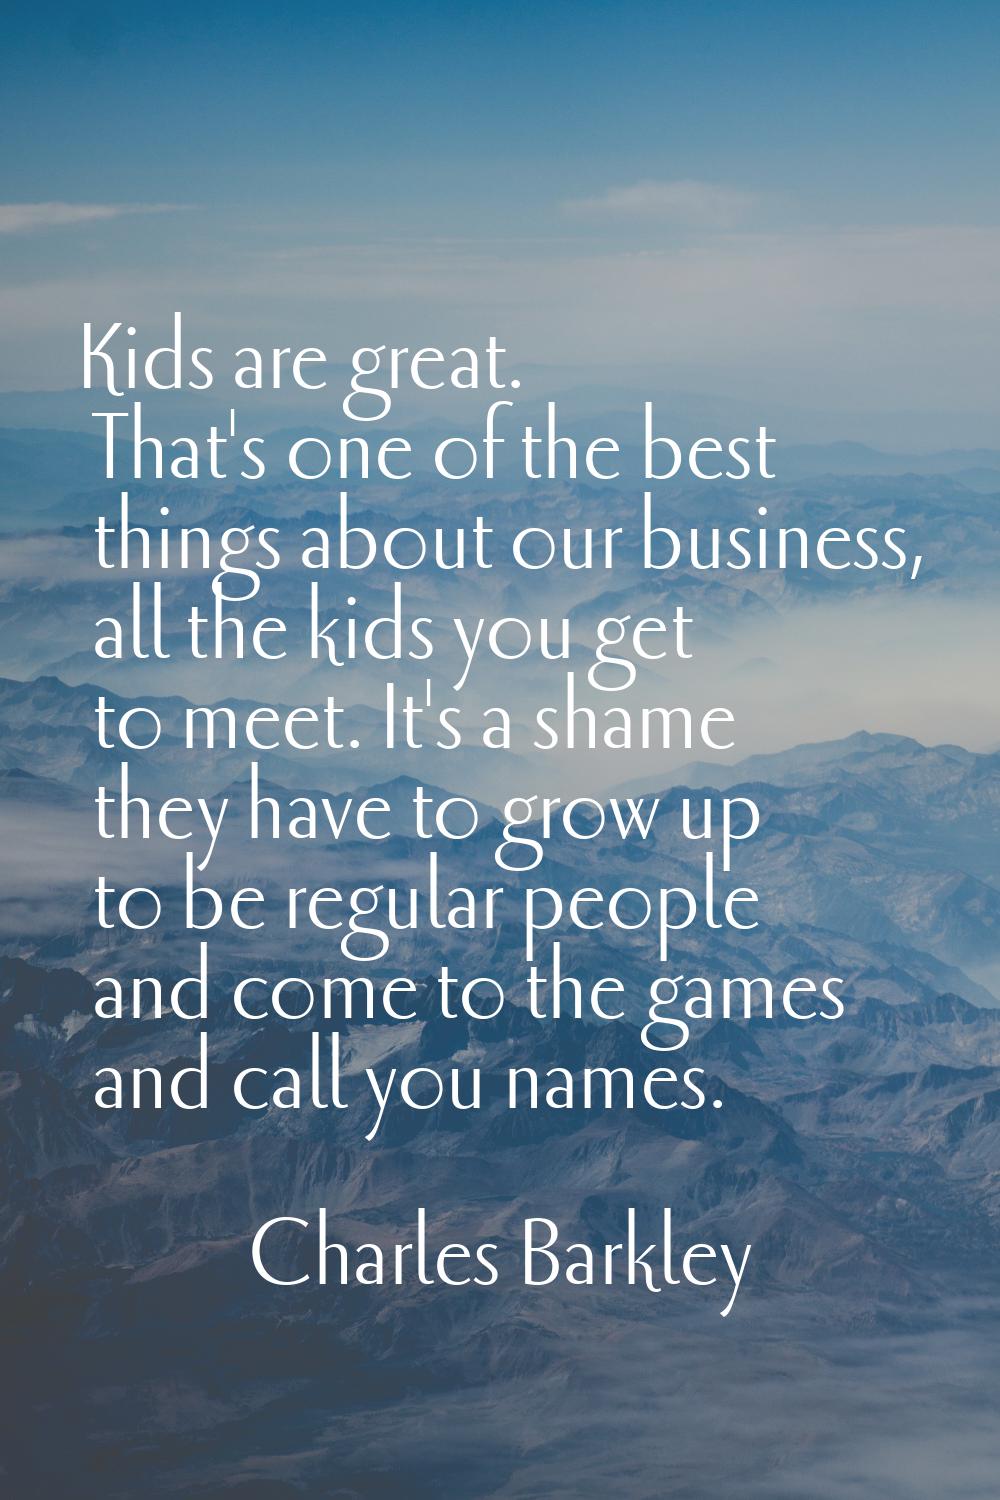 Kids are great. That's one of the best things about our business, all the kids you get to meet. It'